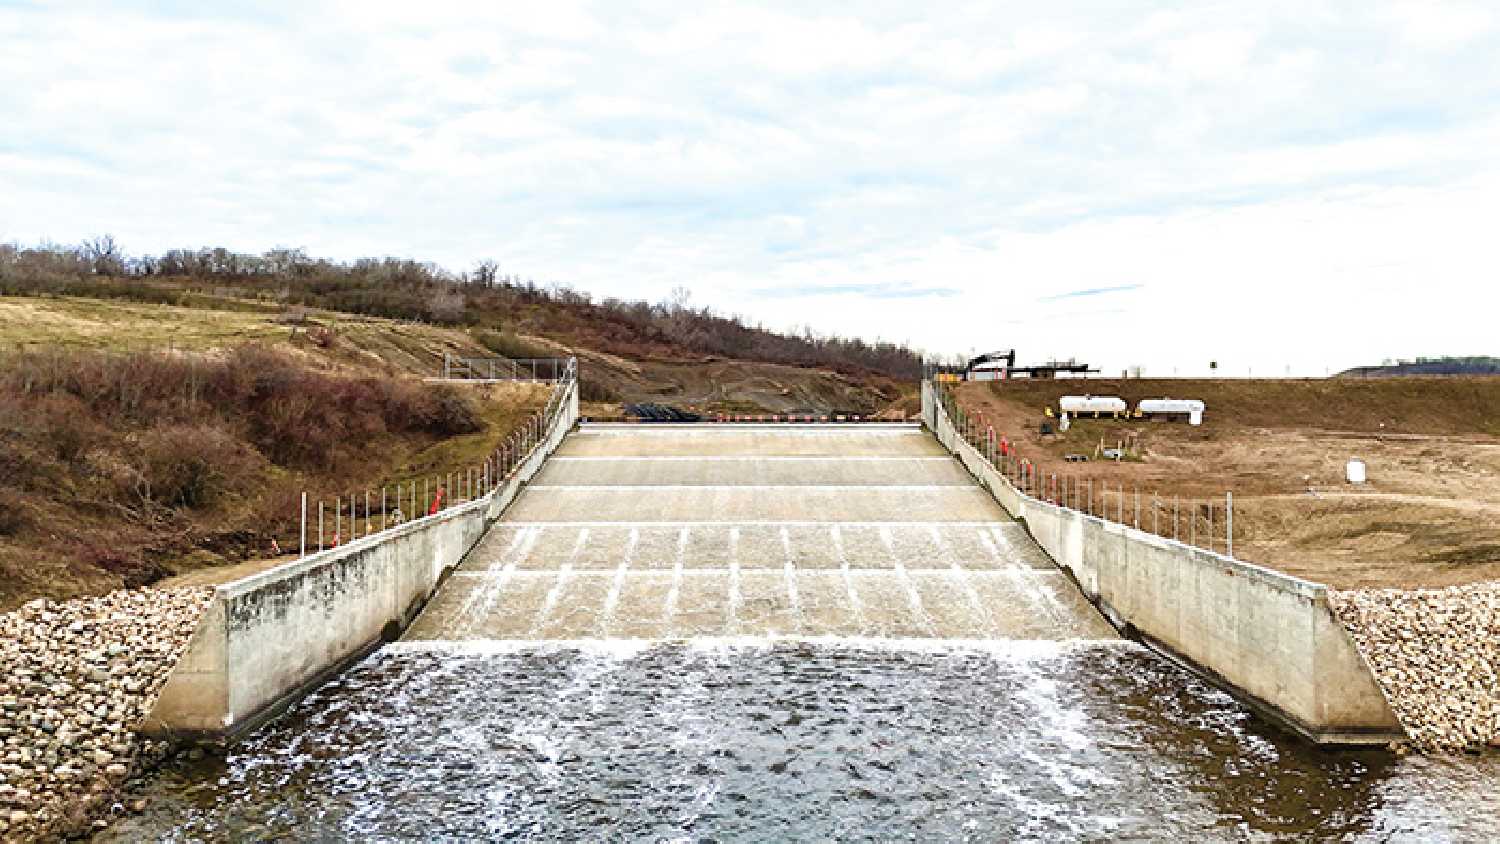 The installation of the concreted slab on the spillway of Moosomin Dam has been completed in time for spring runoff.